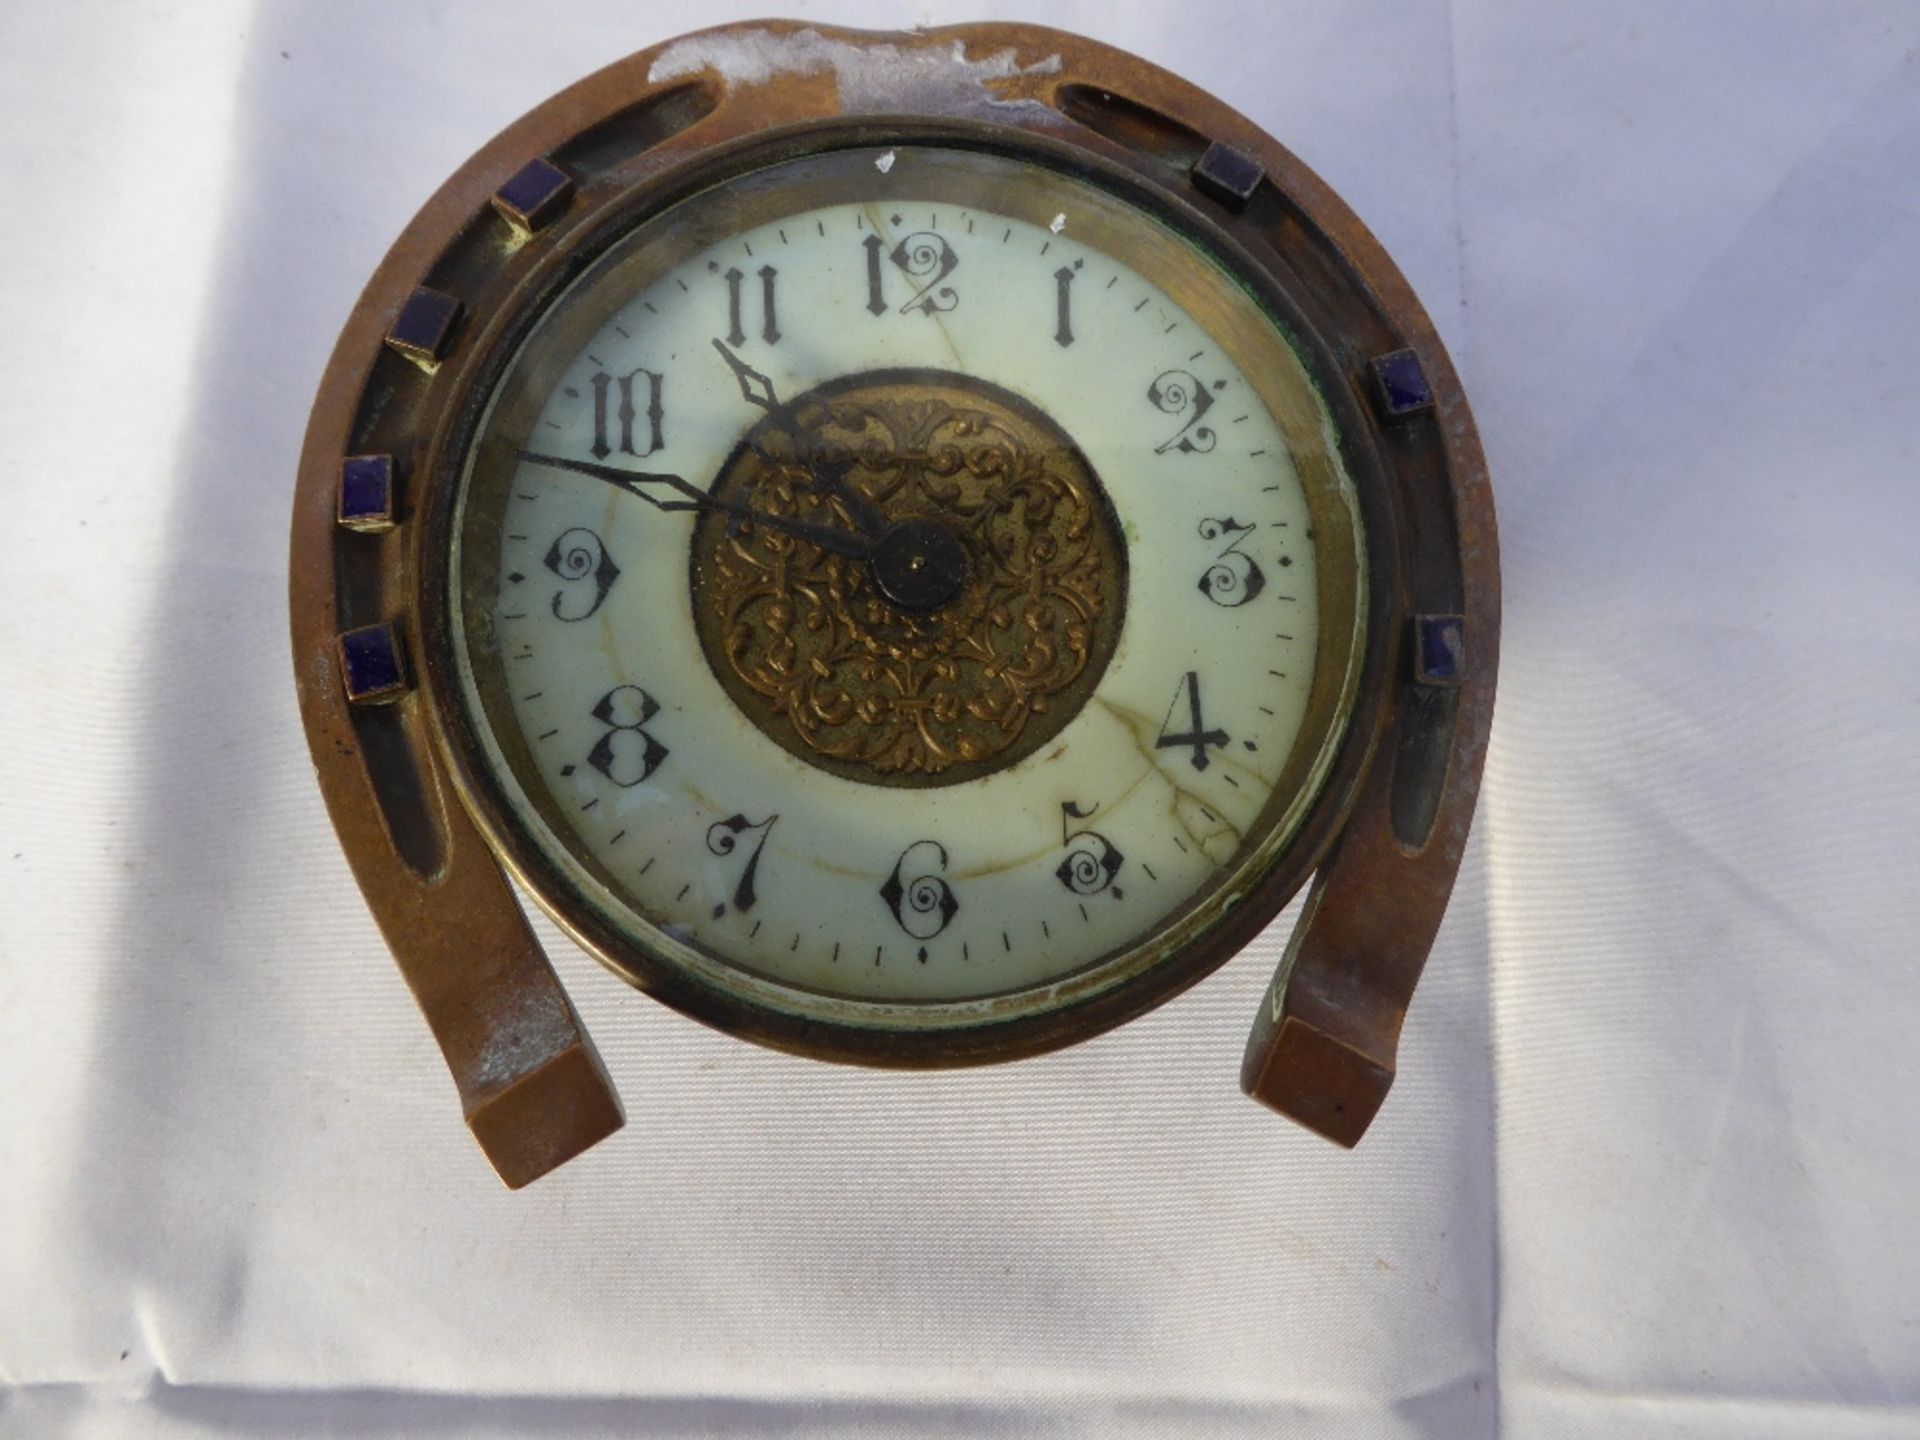 Antique brass cased clock, the frame in the shape of a horseshoe, the mechanism marked JF.